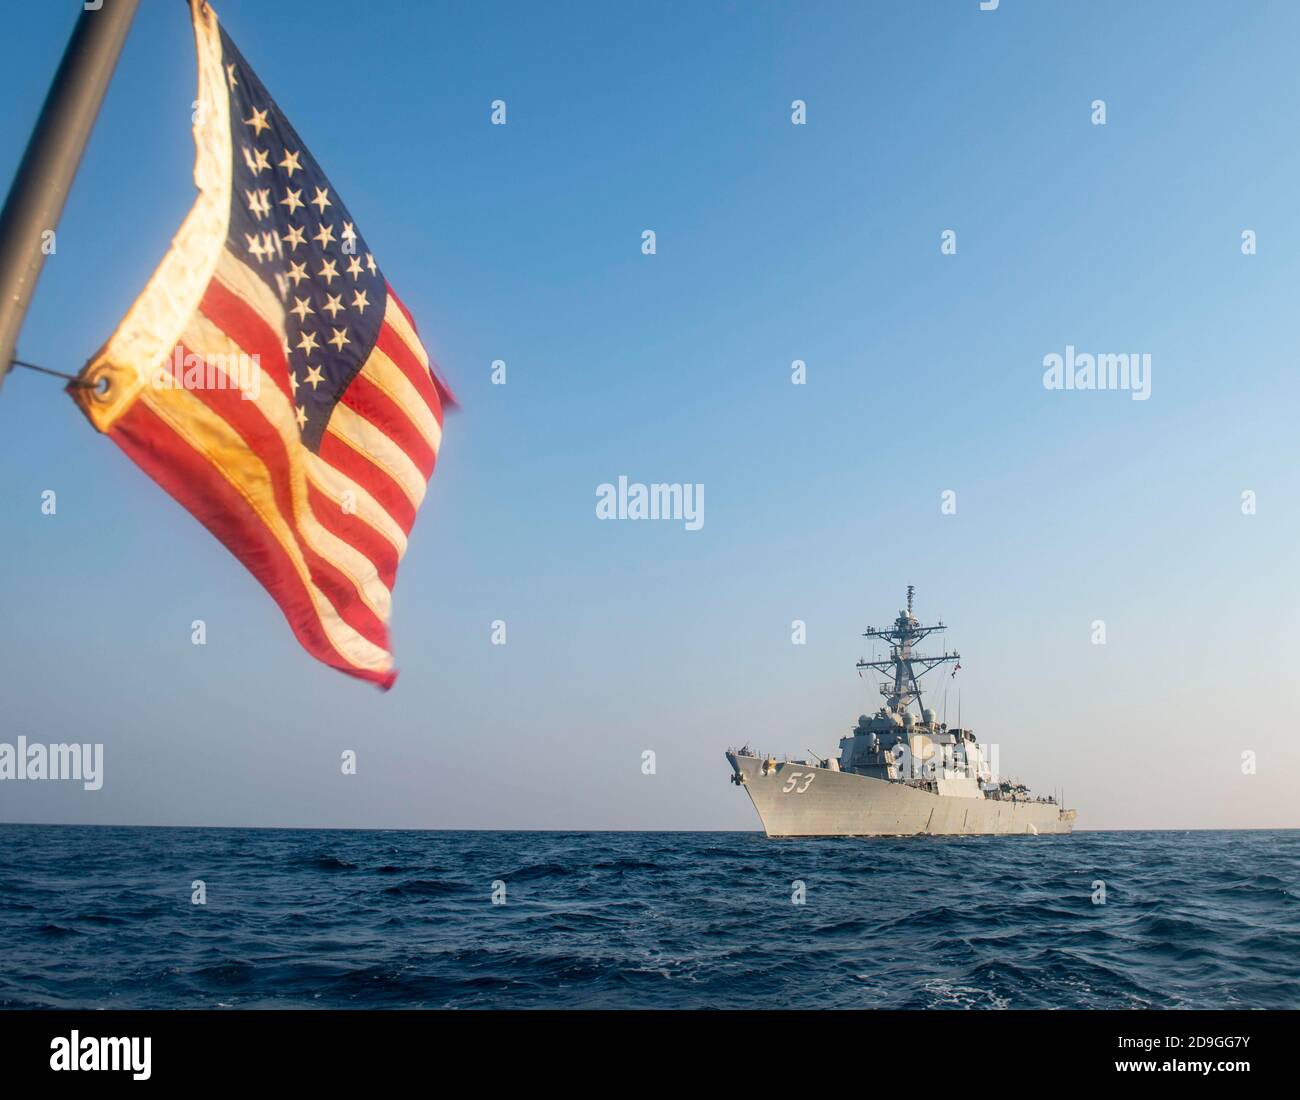 The U.S. Navy Arleigh Burke class guided-missile destroyer USS John Paul Jones patrols as part of the Coalition Task Force Sentinel October 27, 2020 in the Arabian Gulf. Stock Photo